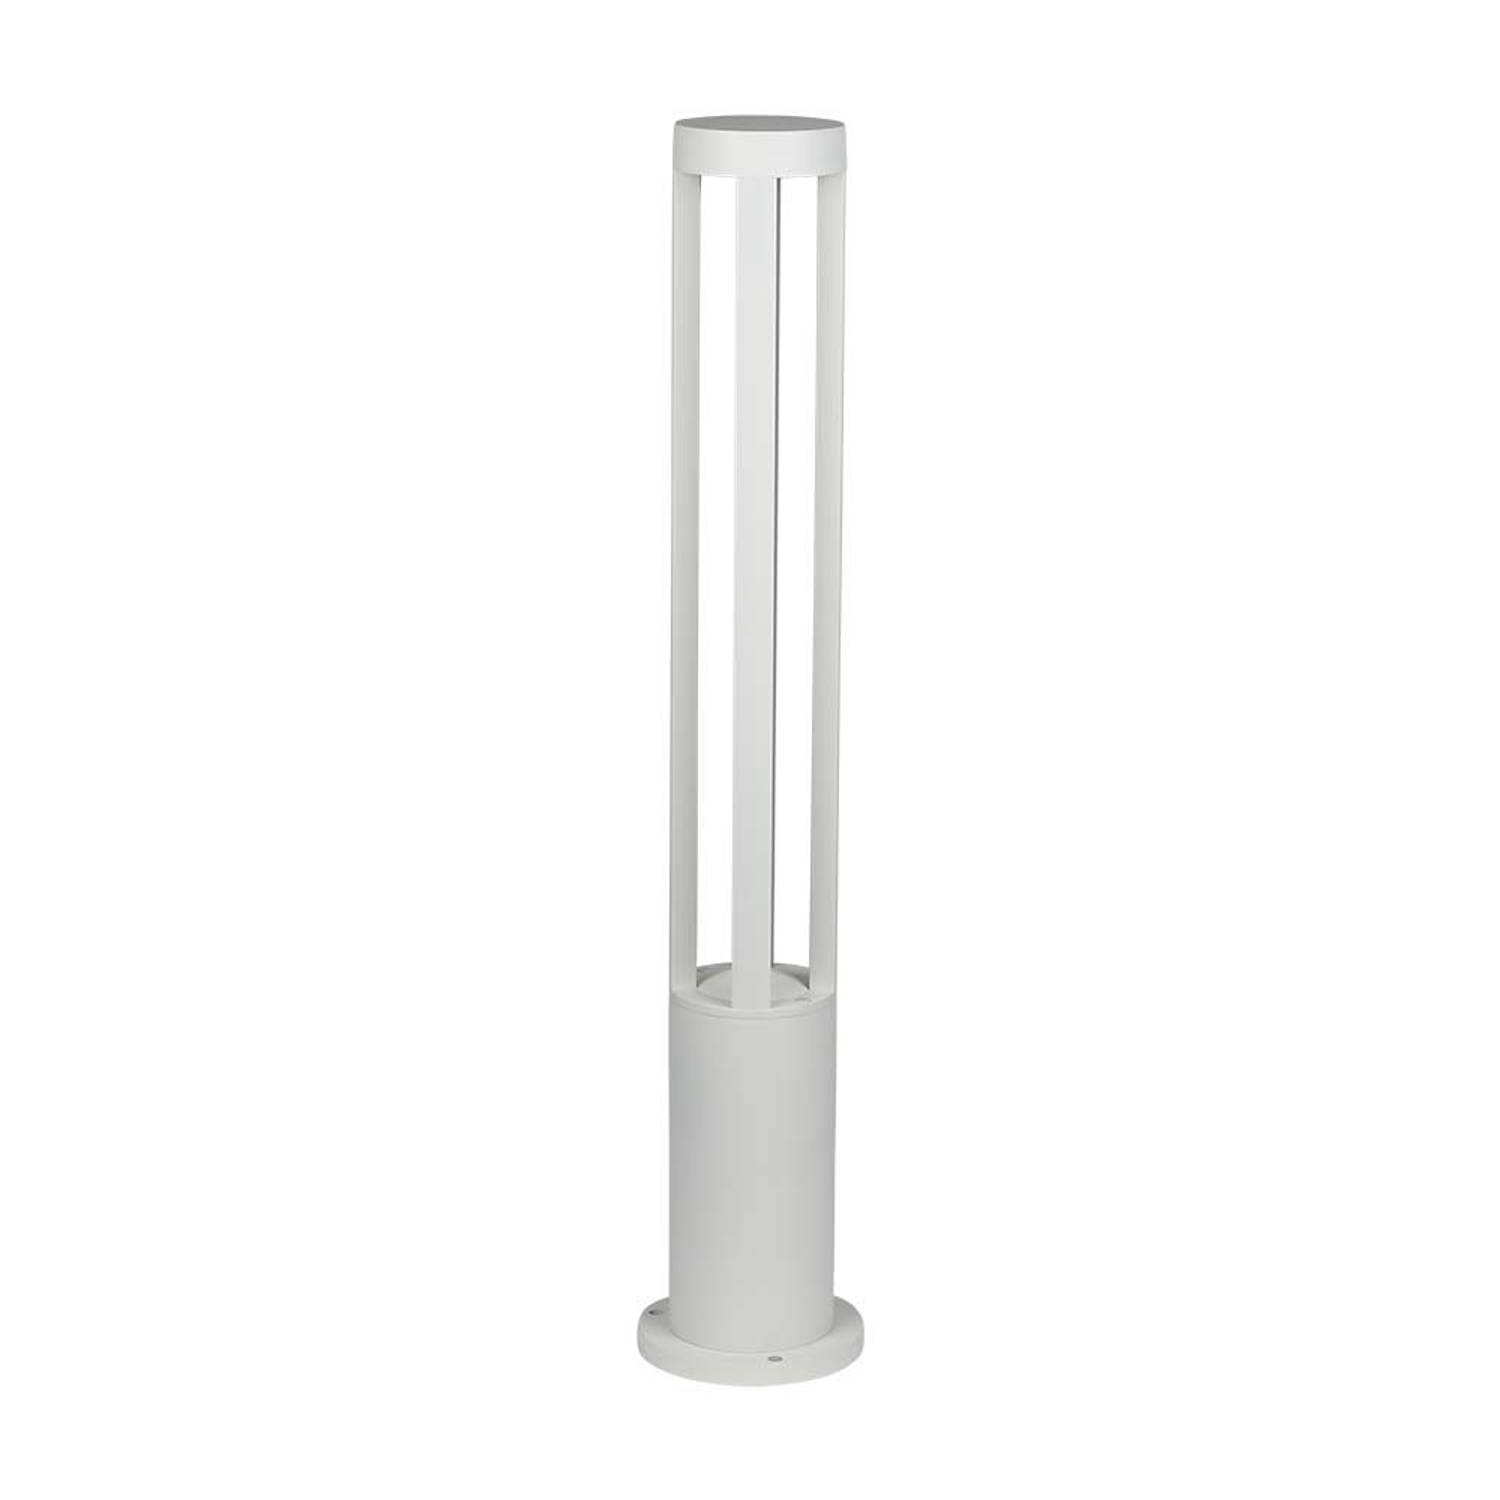 LED Meerpaalverlichting 10W (Wit) 80 cm - Dag Wit 4000K